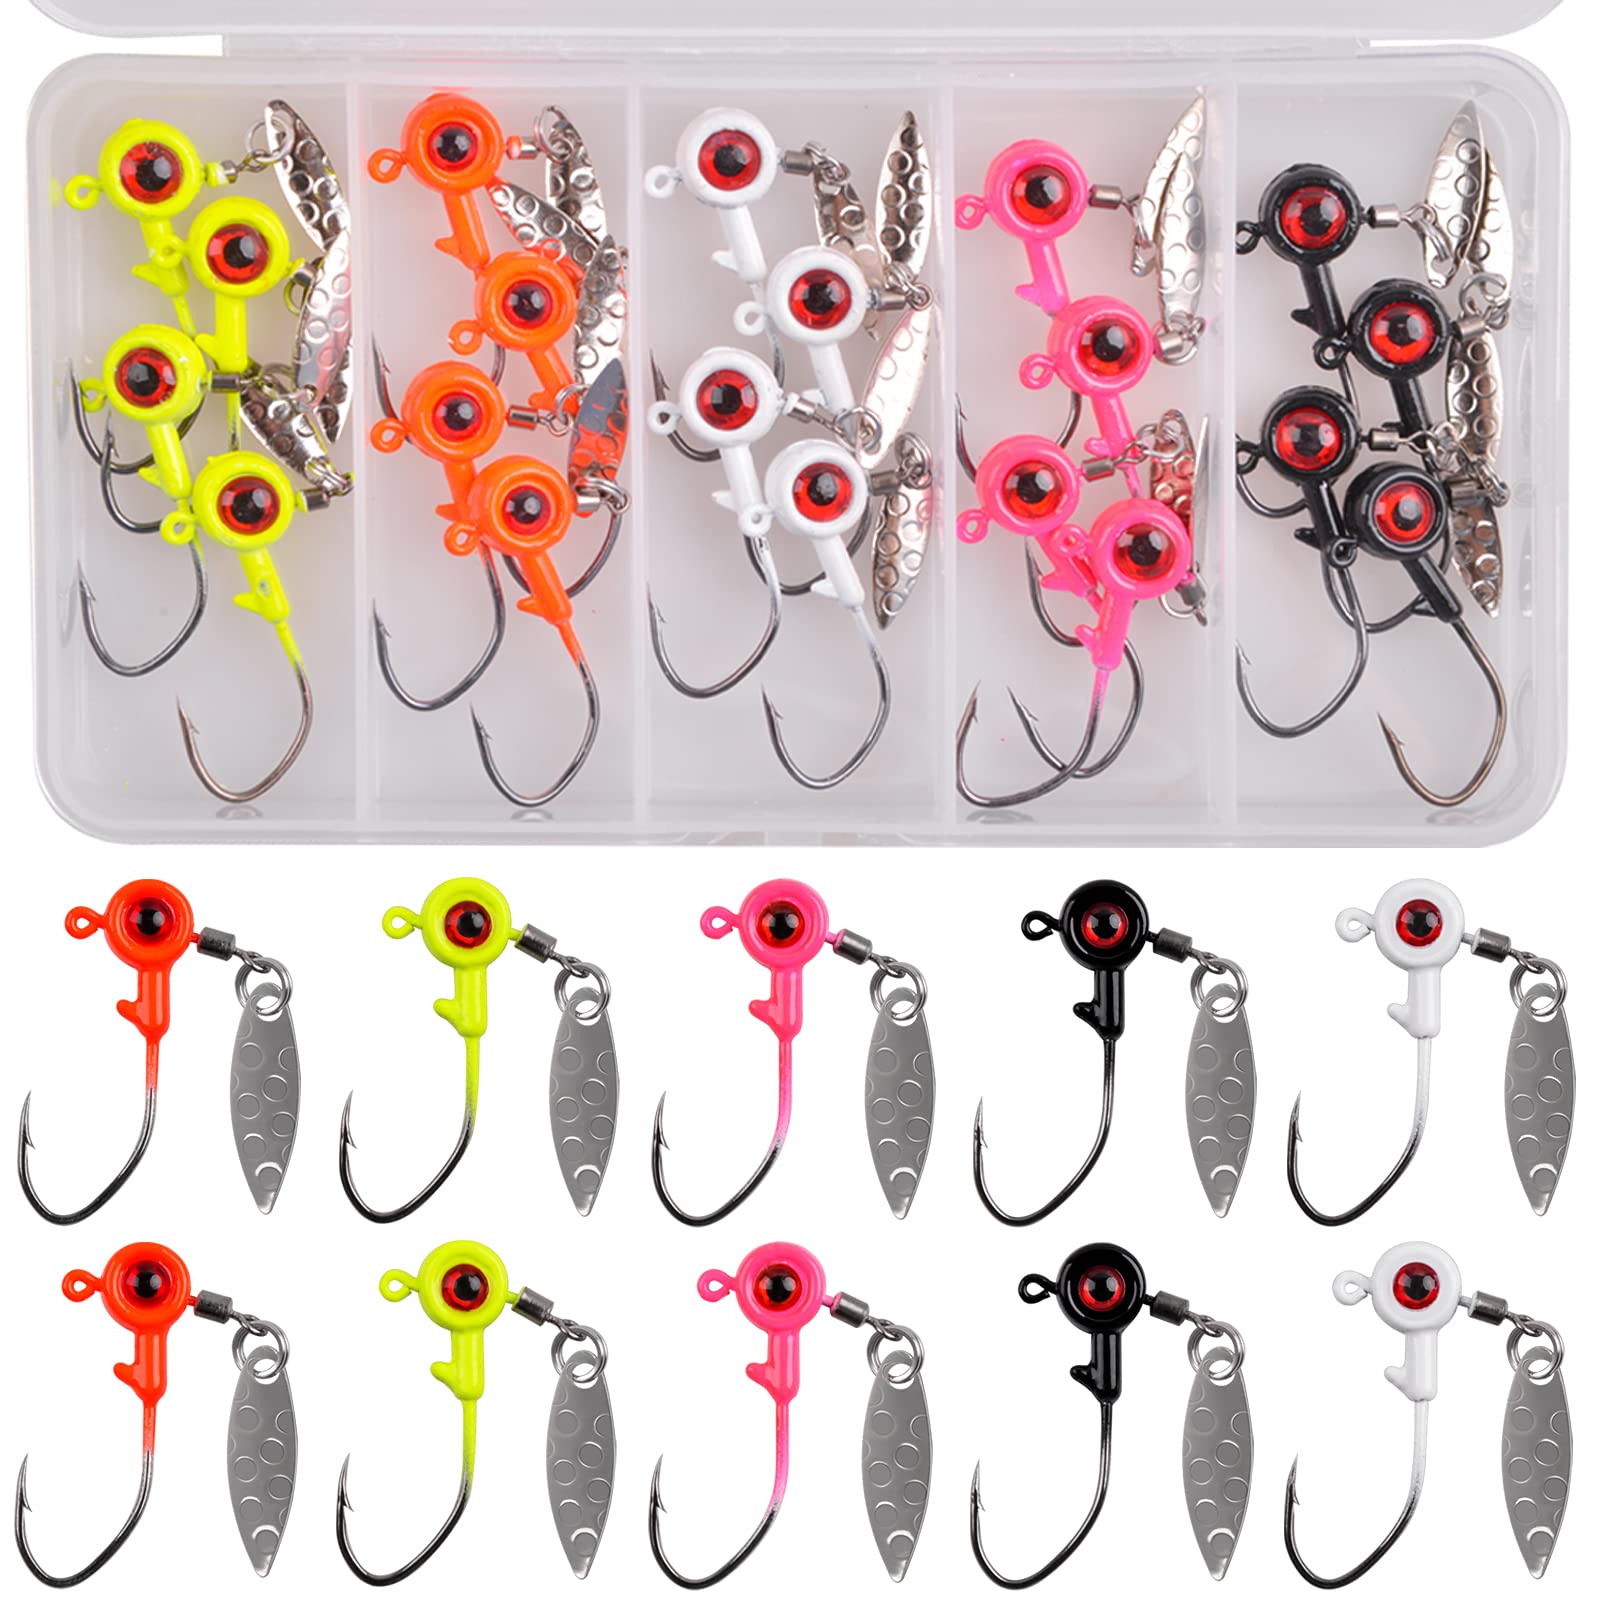 Fishing Jig Heads Kit 20pcs Flat Round Ball Head 3D Eyes Crappie Jig Head  with Spinner